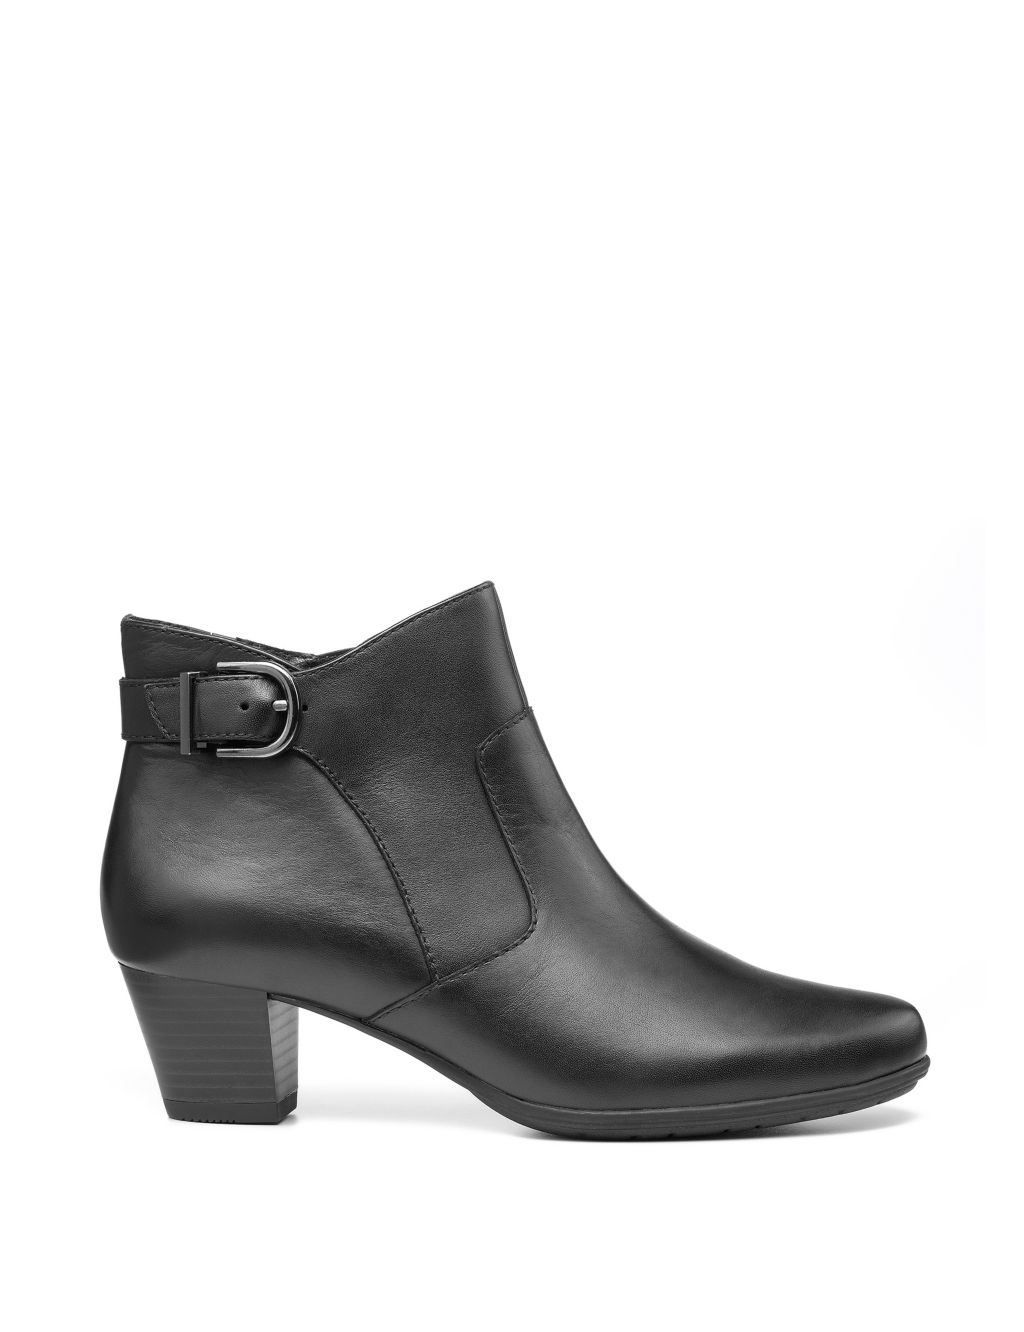 Addison Leather Buckle Block Heel Ankle Boots